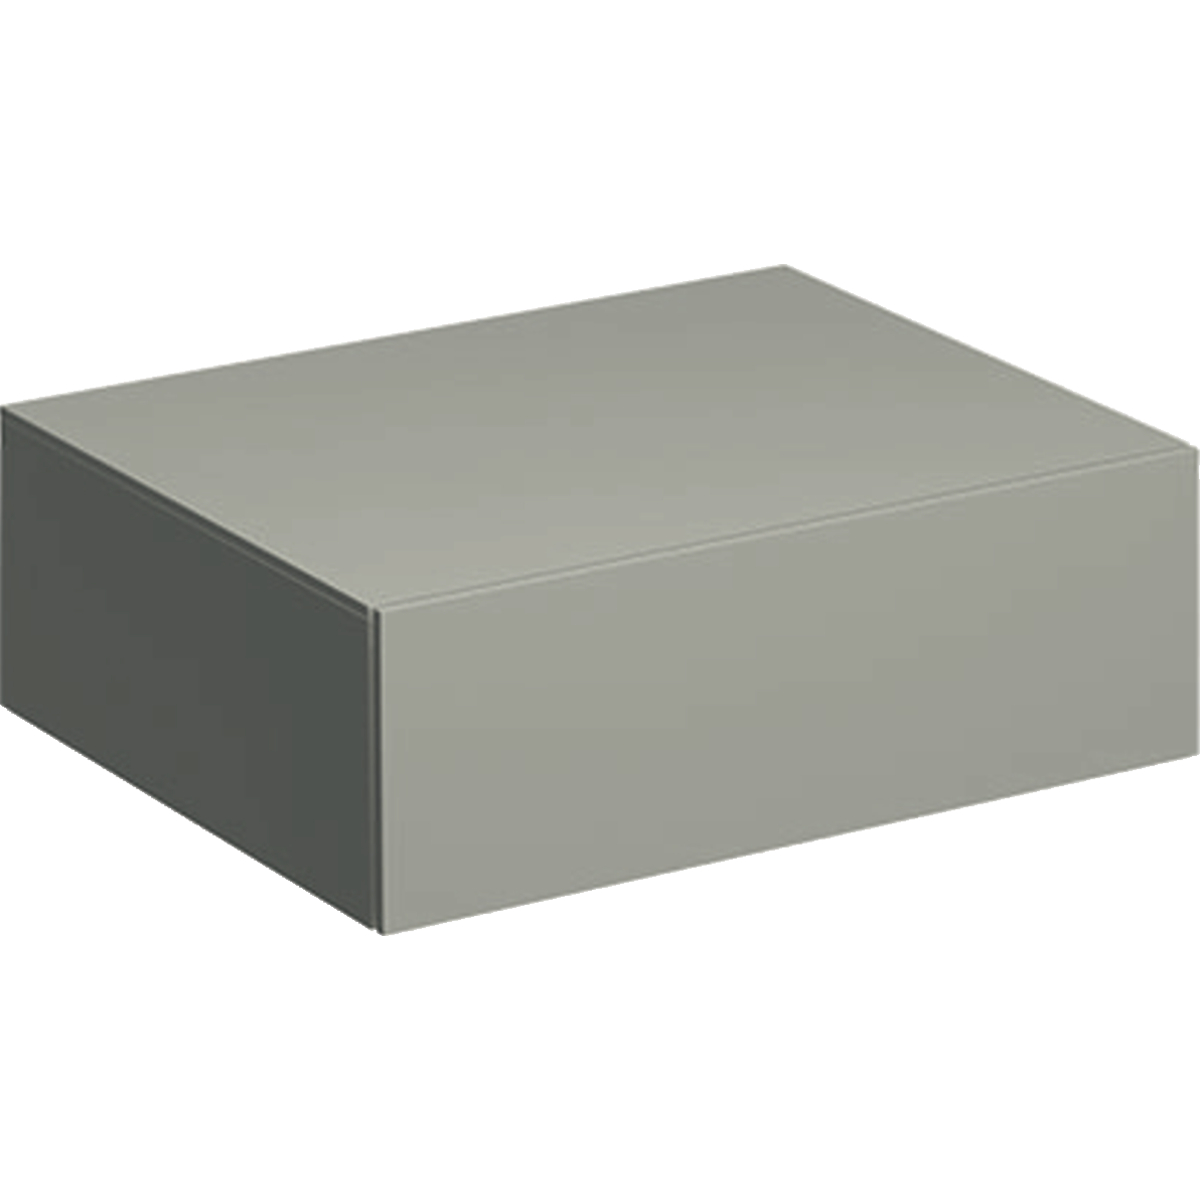 Geberit 500507001 Xeno2 580mm Side Cabinet with One Drawer - Grey